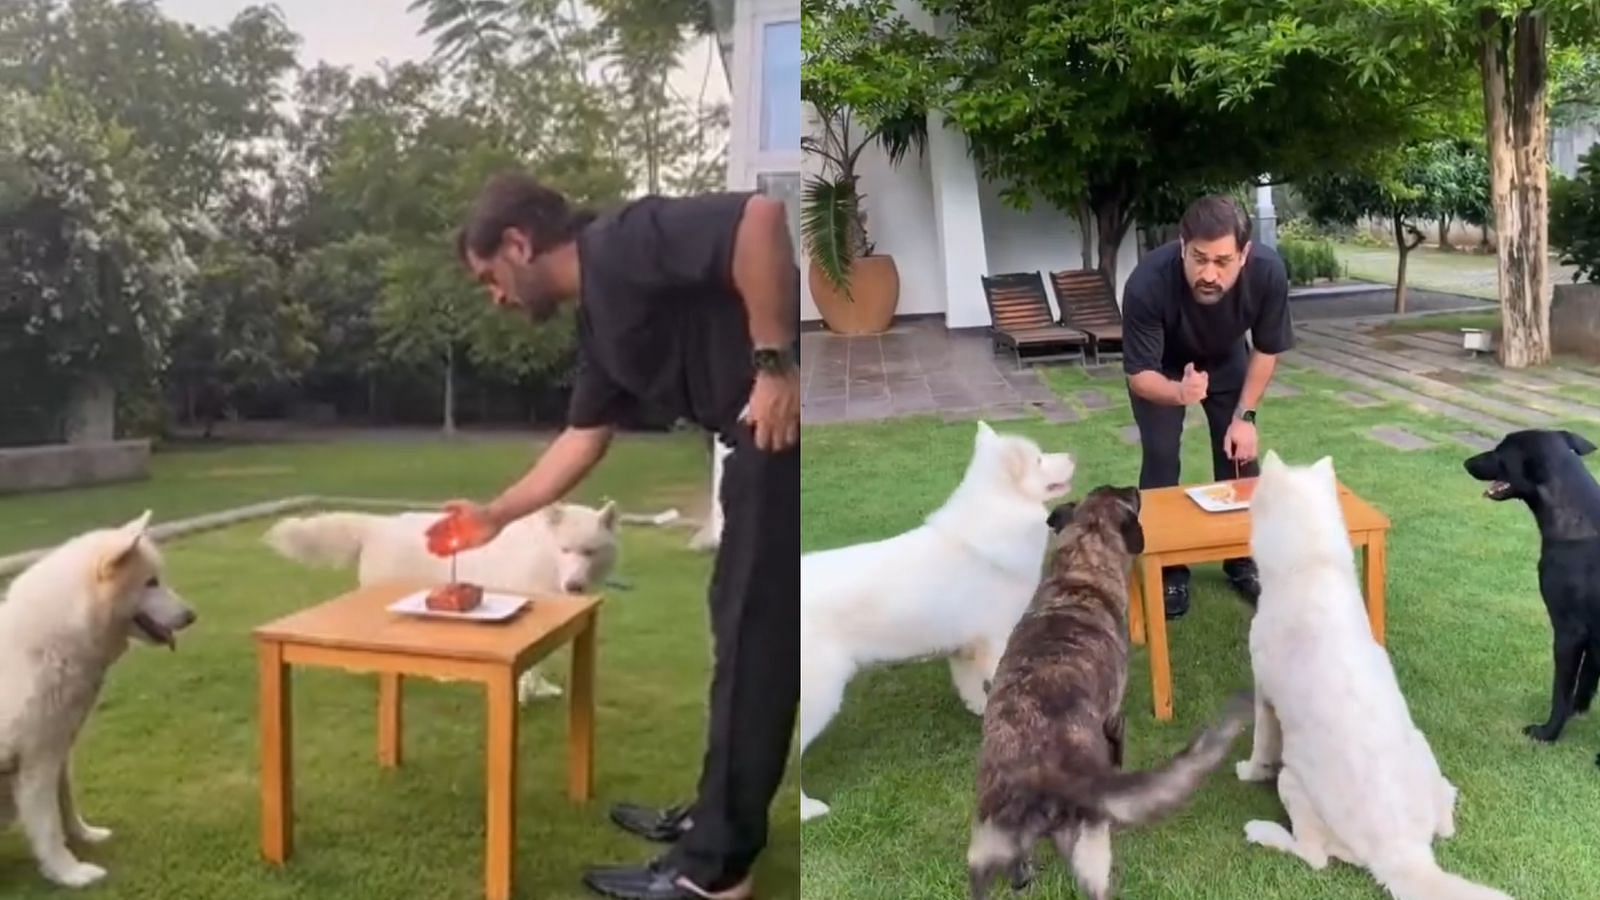 MS Dhoni celebrated his 42nd birthday with his dogs (Image: Instagram)